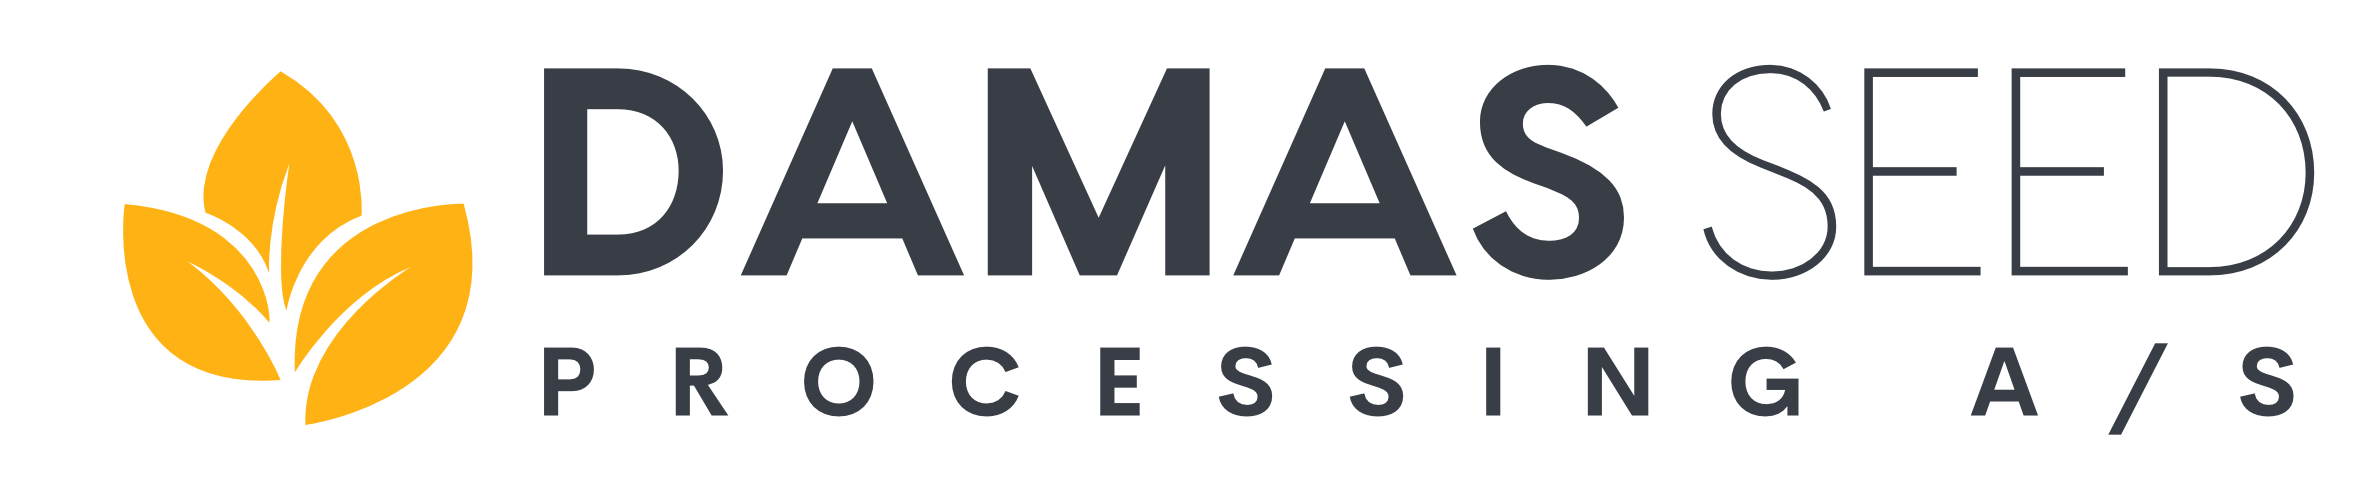 Damas Seed Processing A/S